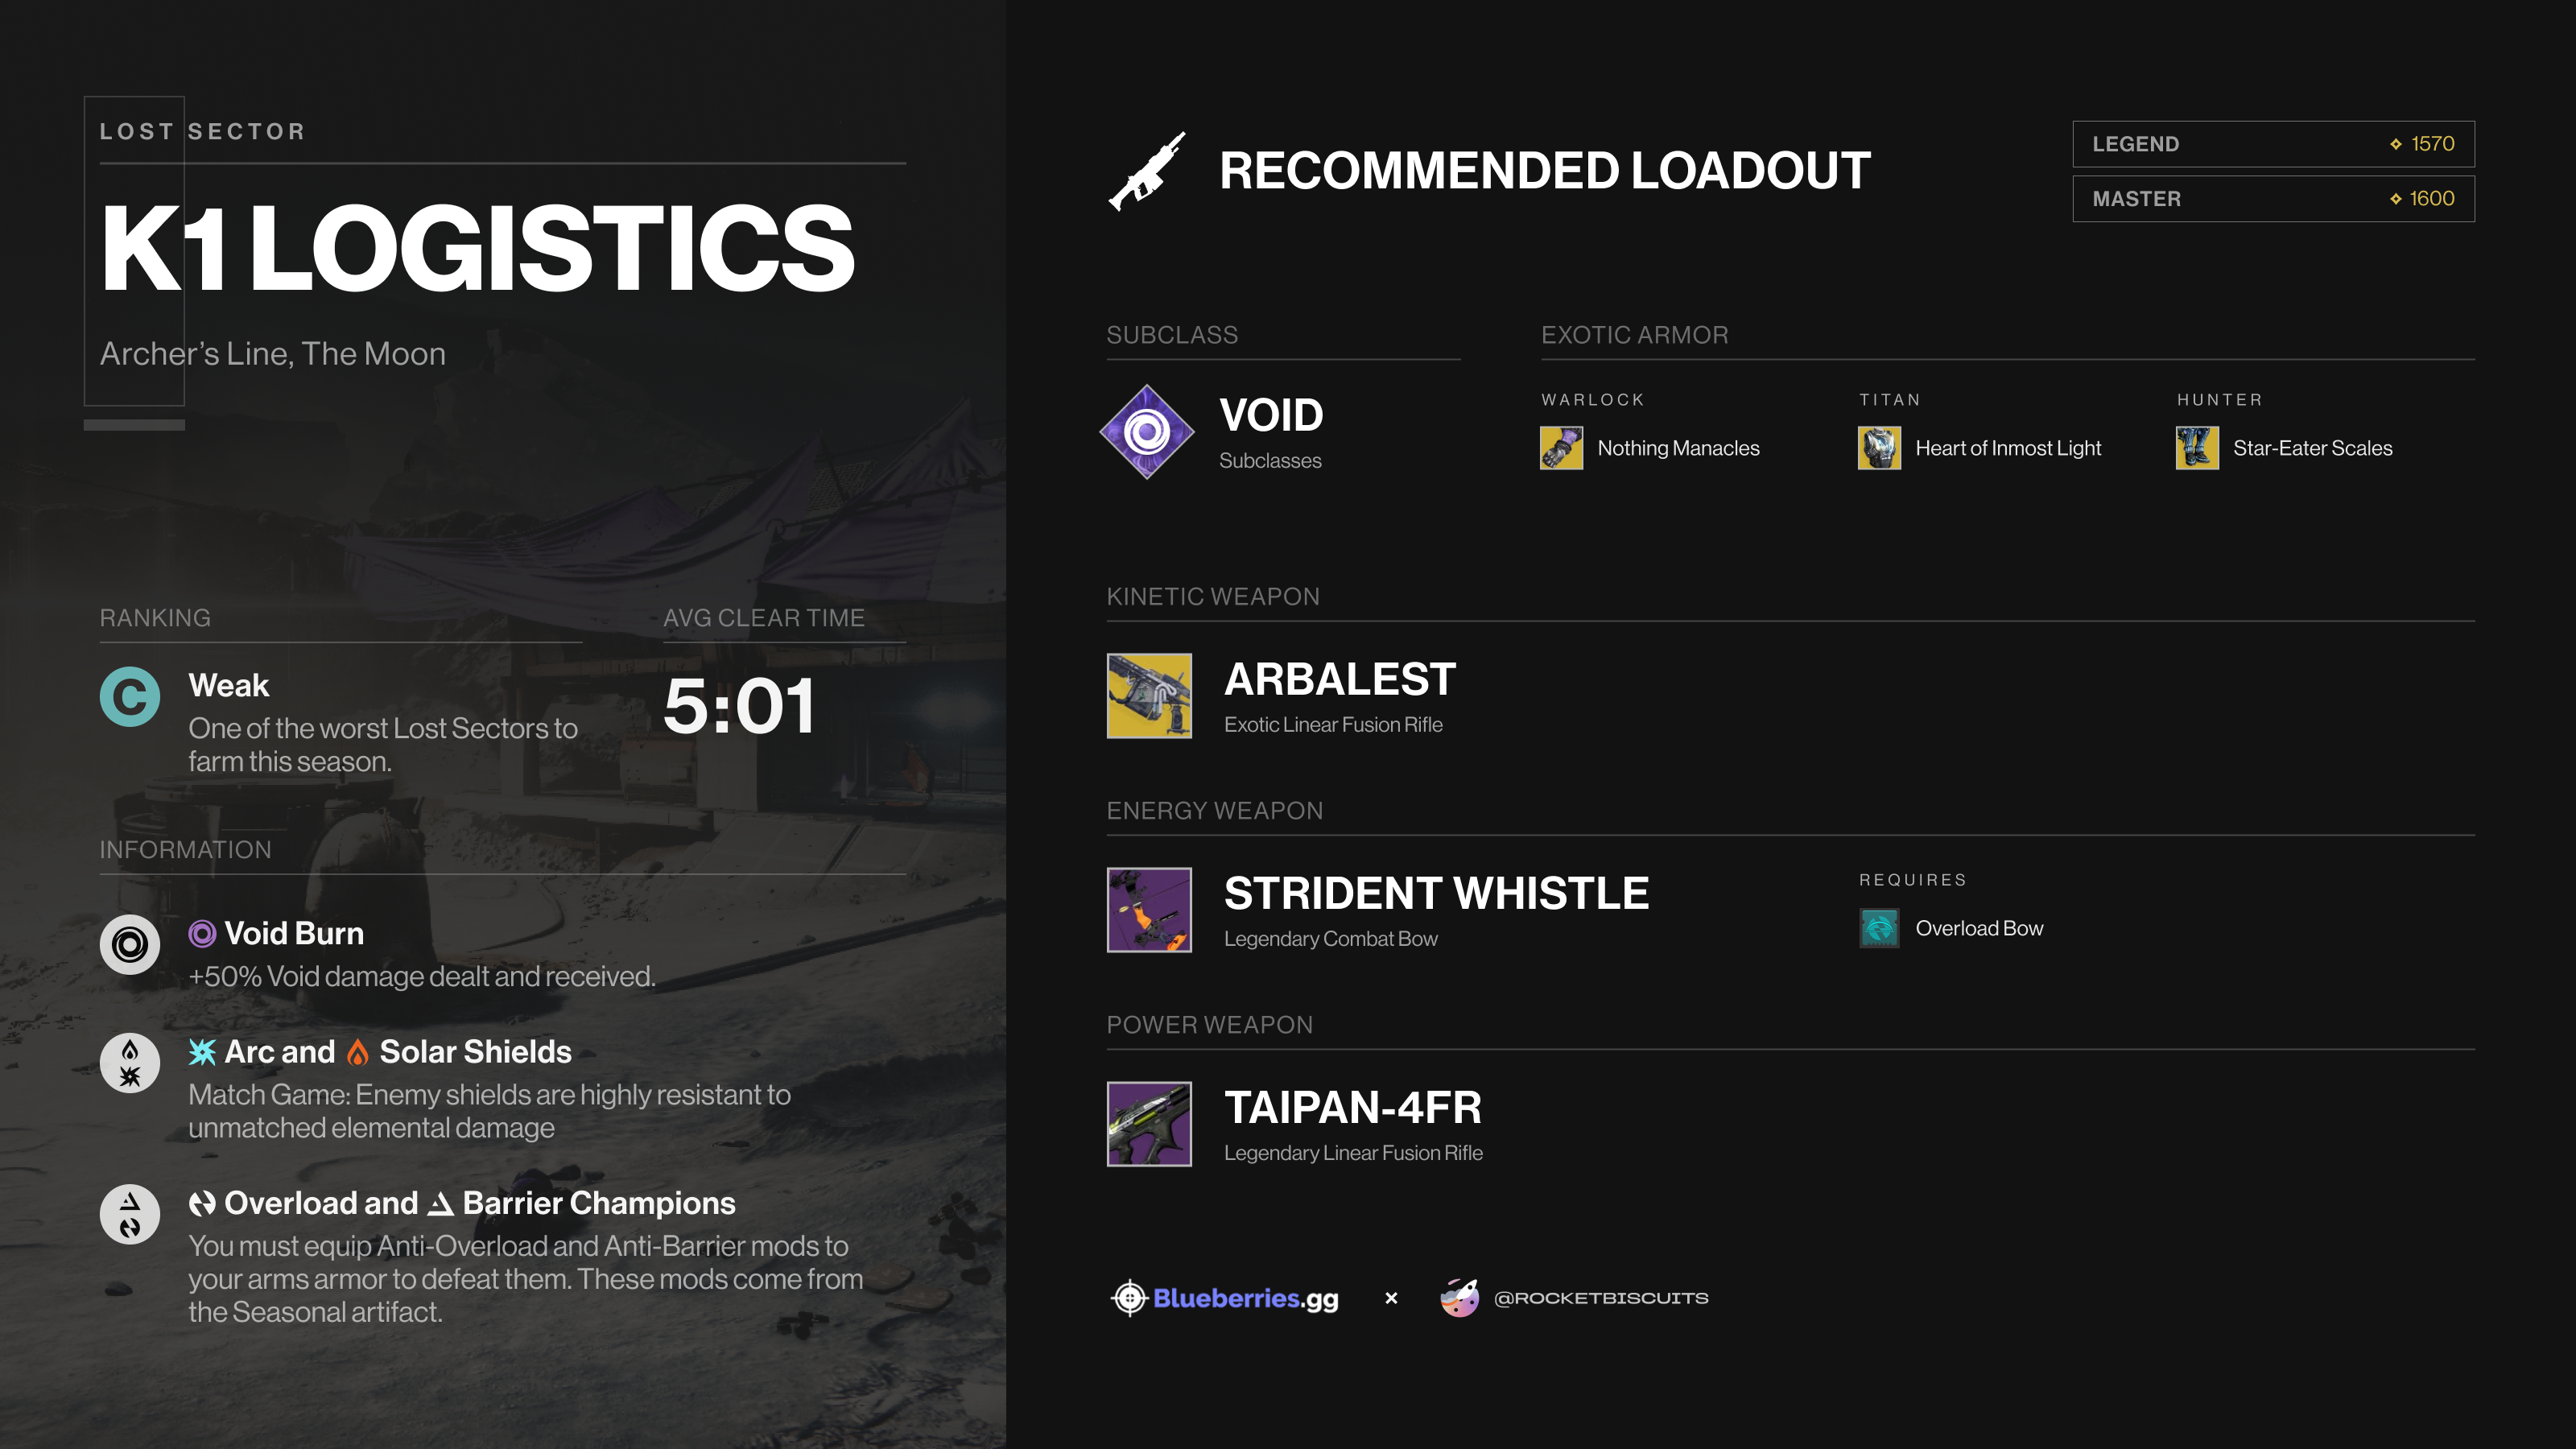 K1 Logistics Lost Sector Infographic